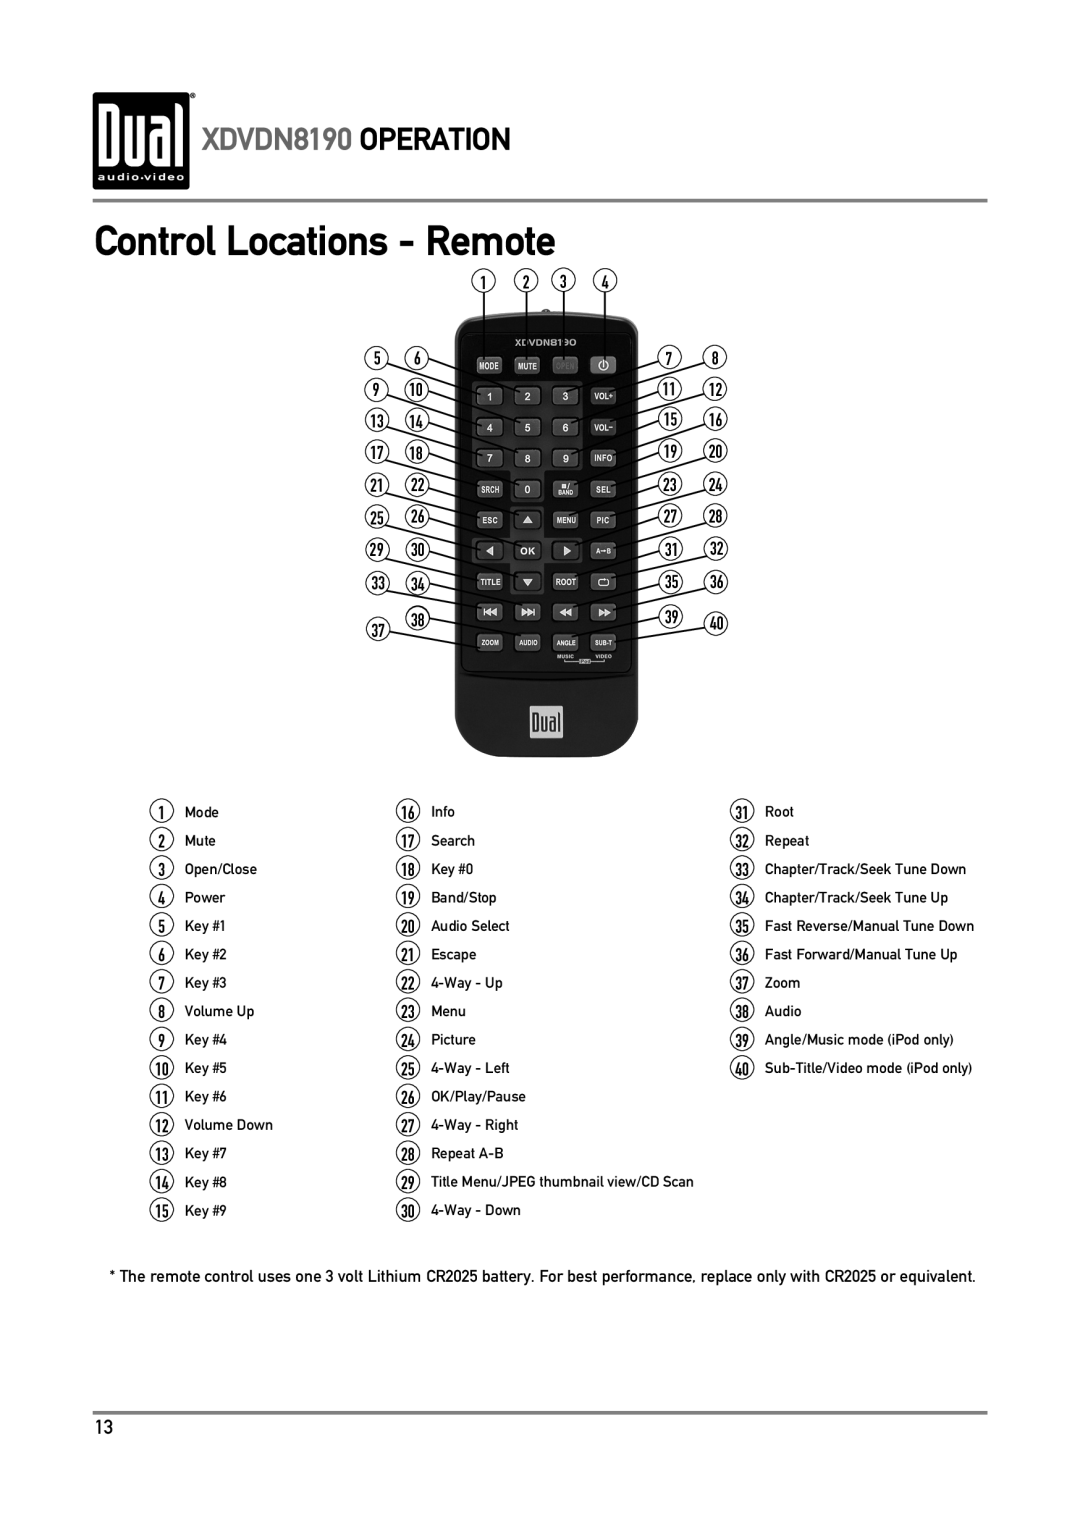 Dual owner manual Control Locations - Remote, XDVDN8190 OPERATION 